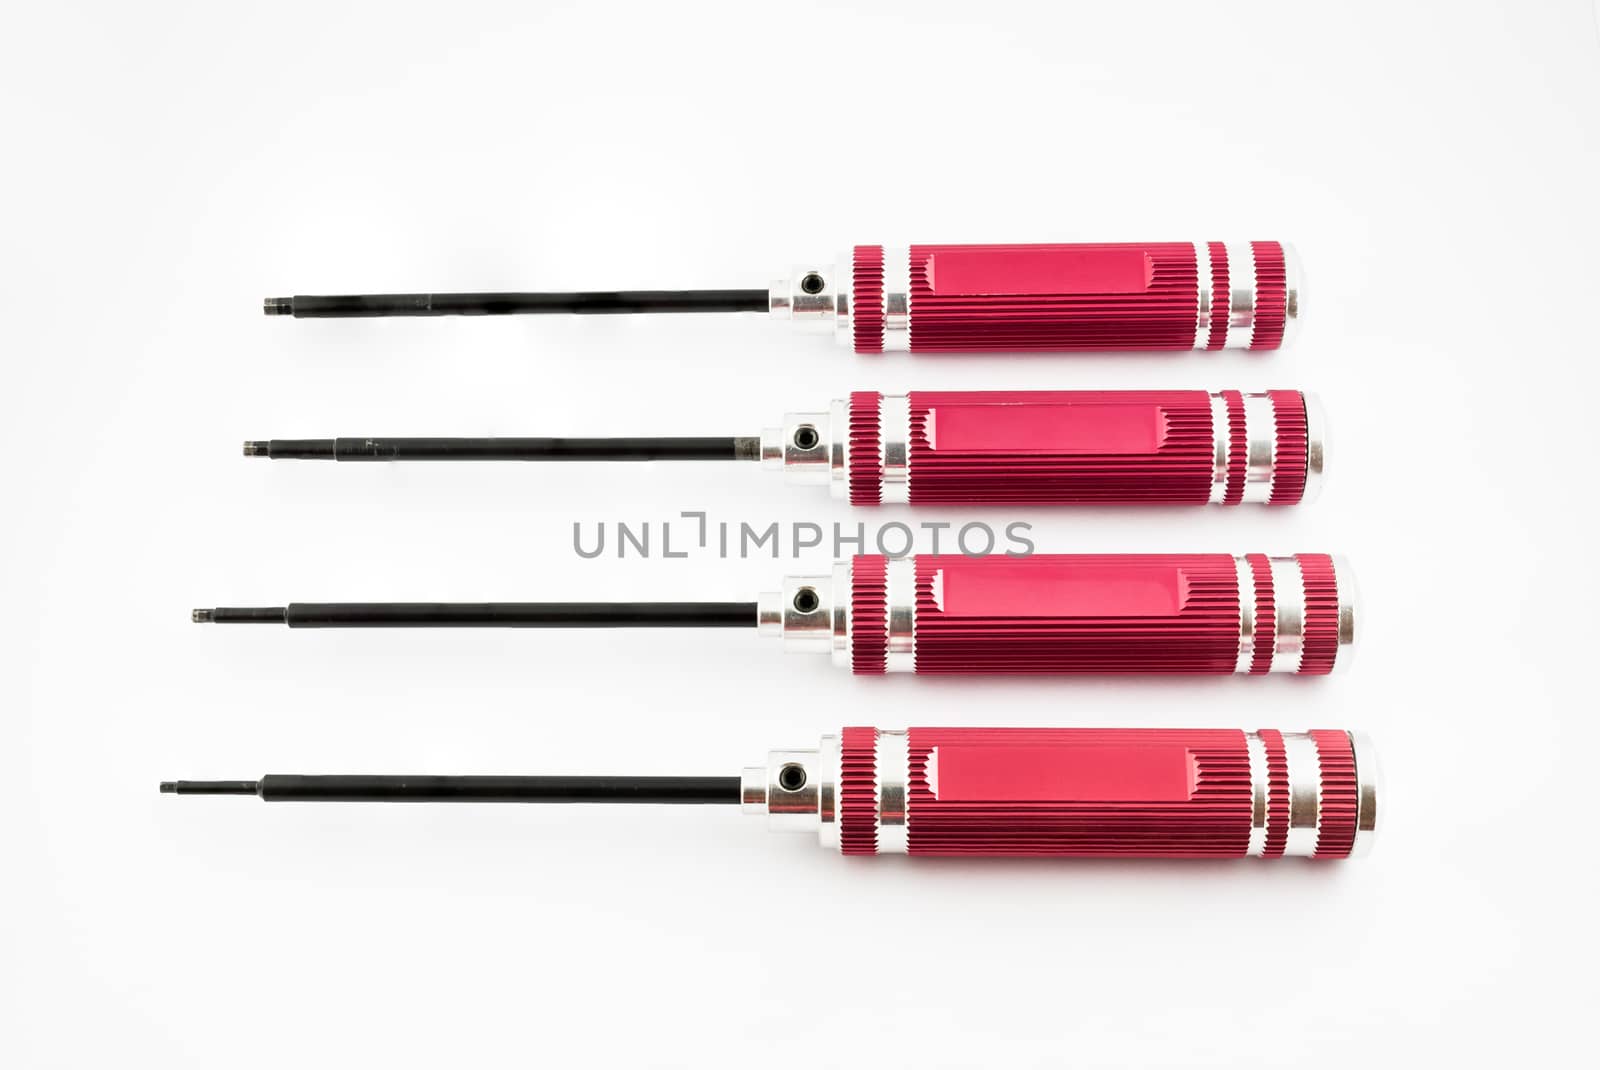 Set of Red Aluminium Hex-Head Screw Drivers by noneam